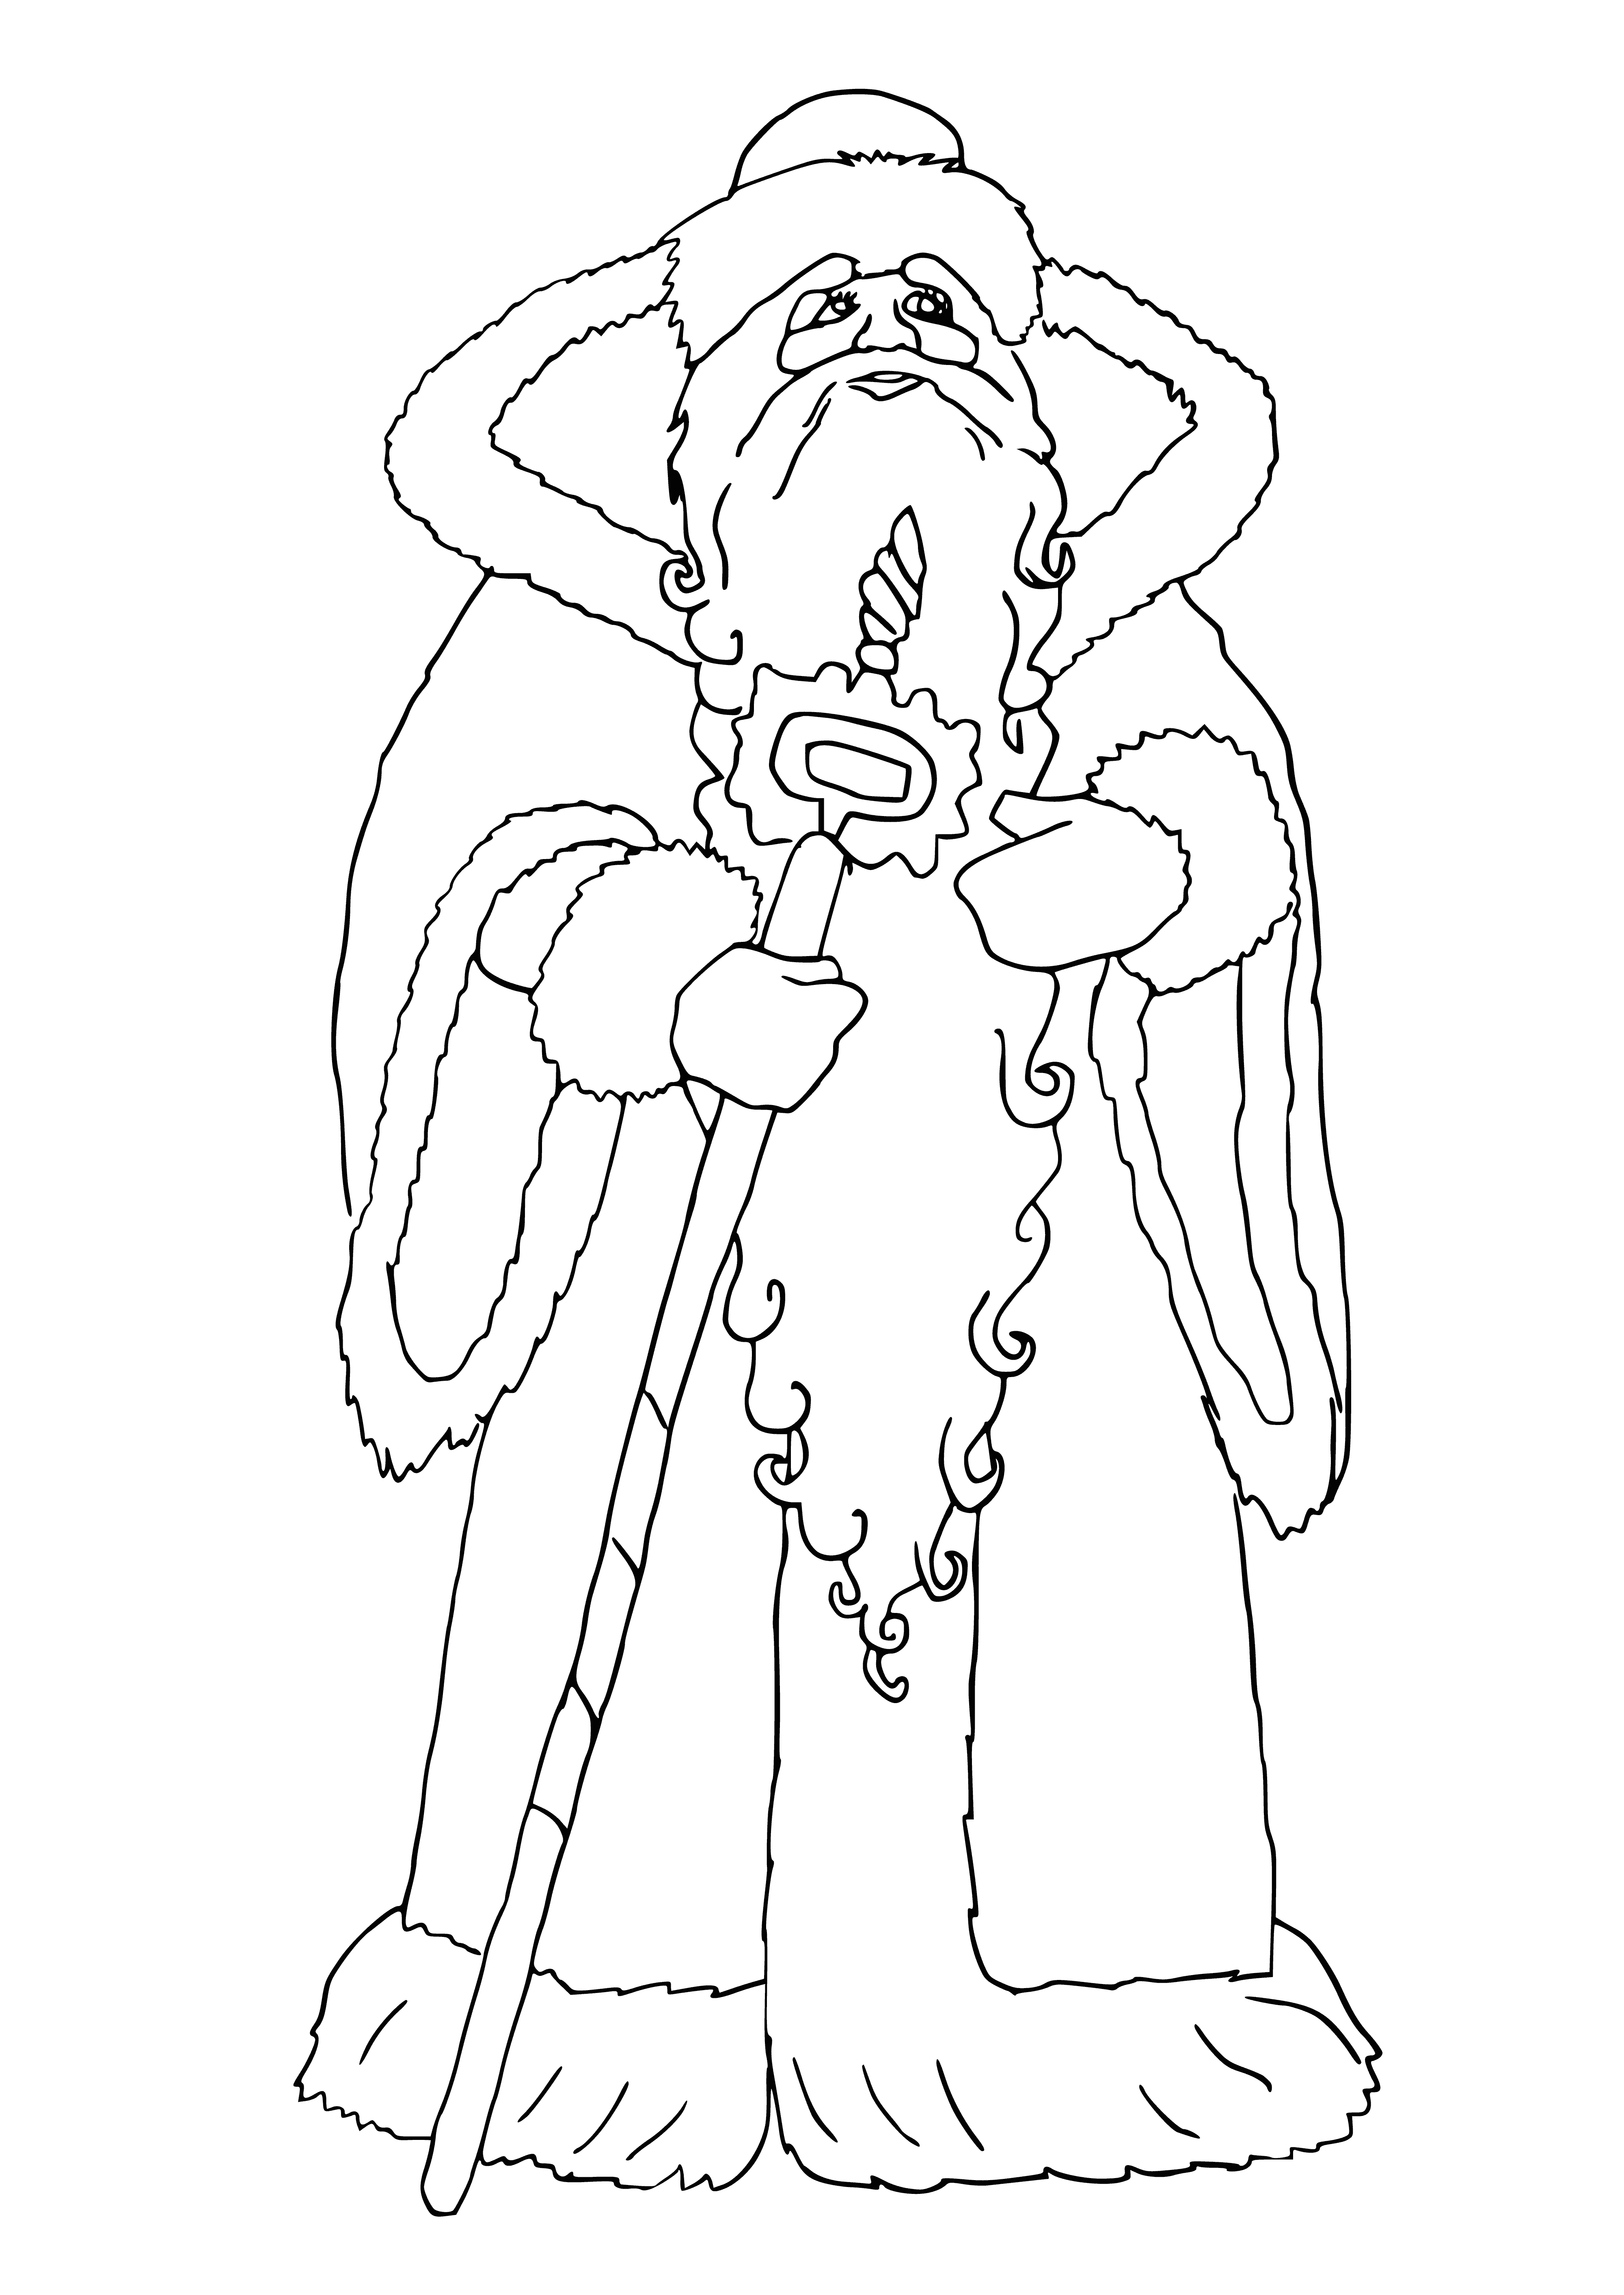 coloring page: Old man in red suit holds presents & toys, stands by fireplace w/stockings on mantel.